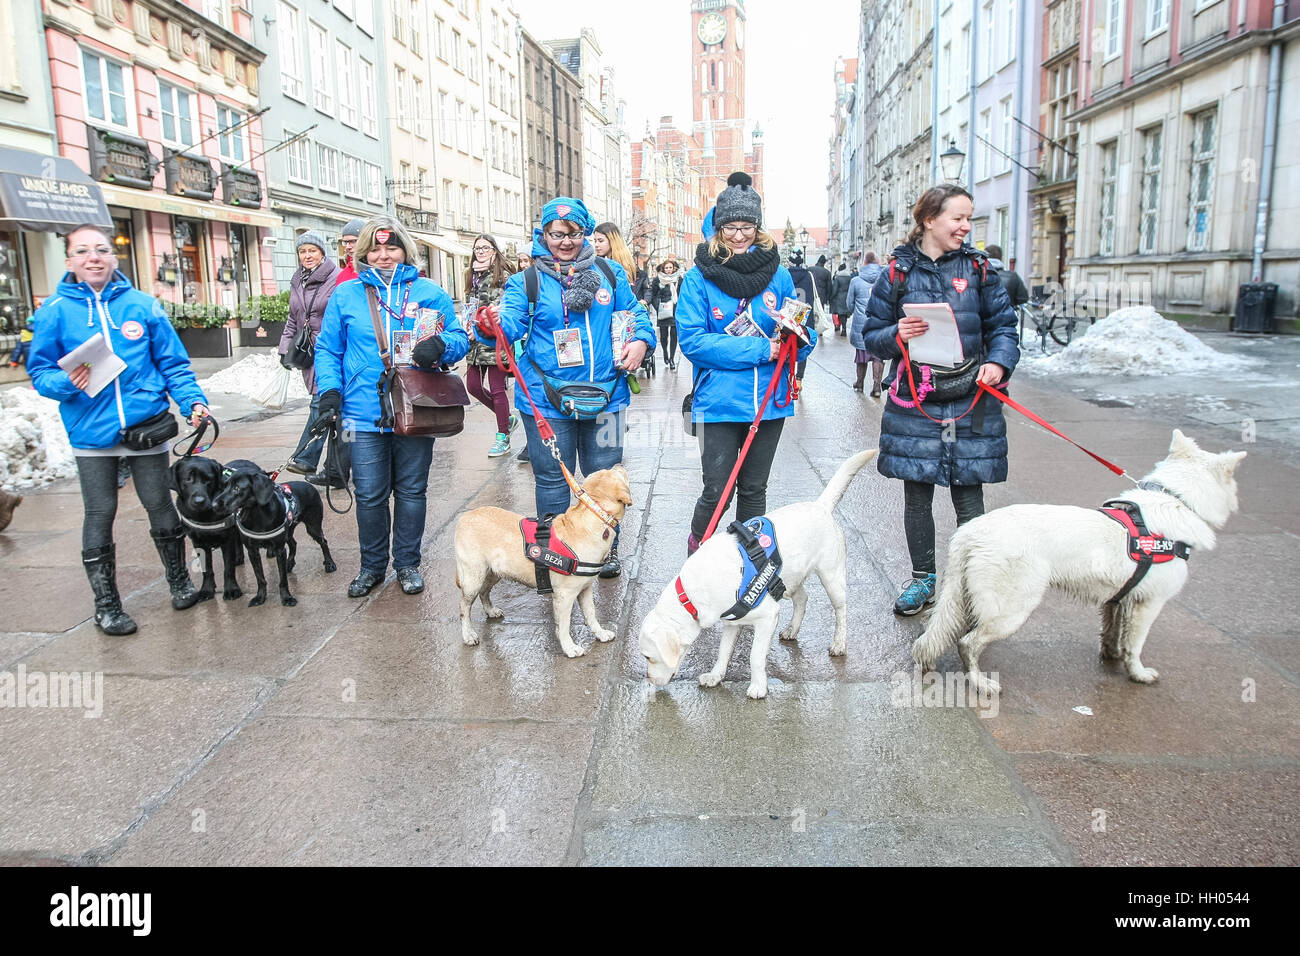 Gdansk, Poland. 15th January 2017. Volunteers with dogs collecting money are seen during 25th Grand Finale of Great Orchestra of Christmas Charity (WOSP) on January 15th, 2017 in Gdansk. Over 120 thousands of volunteers across the Poland collect money on the streets in special cans labelled with a red heart. This year finale is once again devoted to paediatrics and geriatrics. Credit: Michal Fludra/Alamy Live News Stock Photo